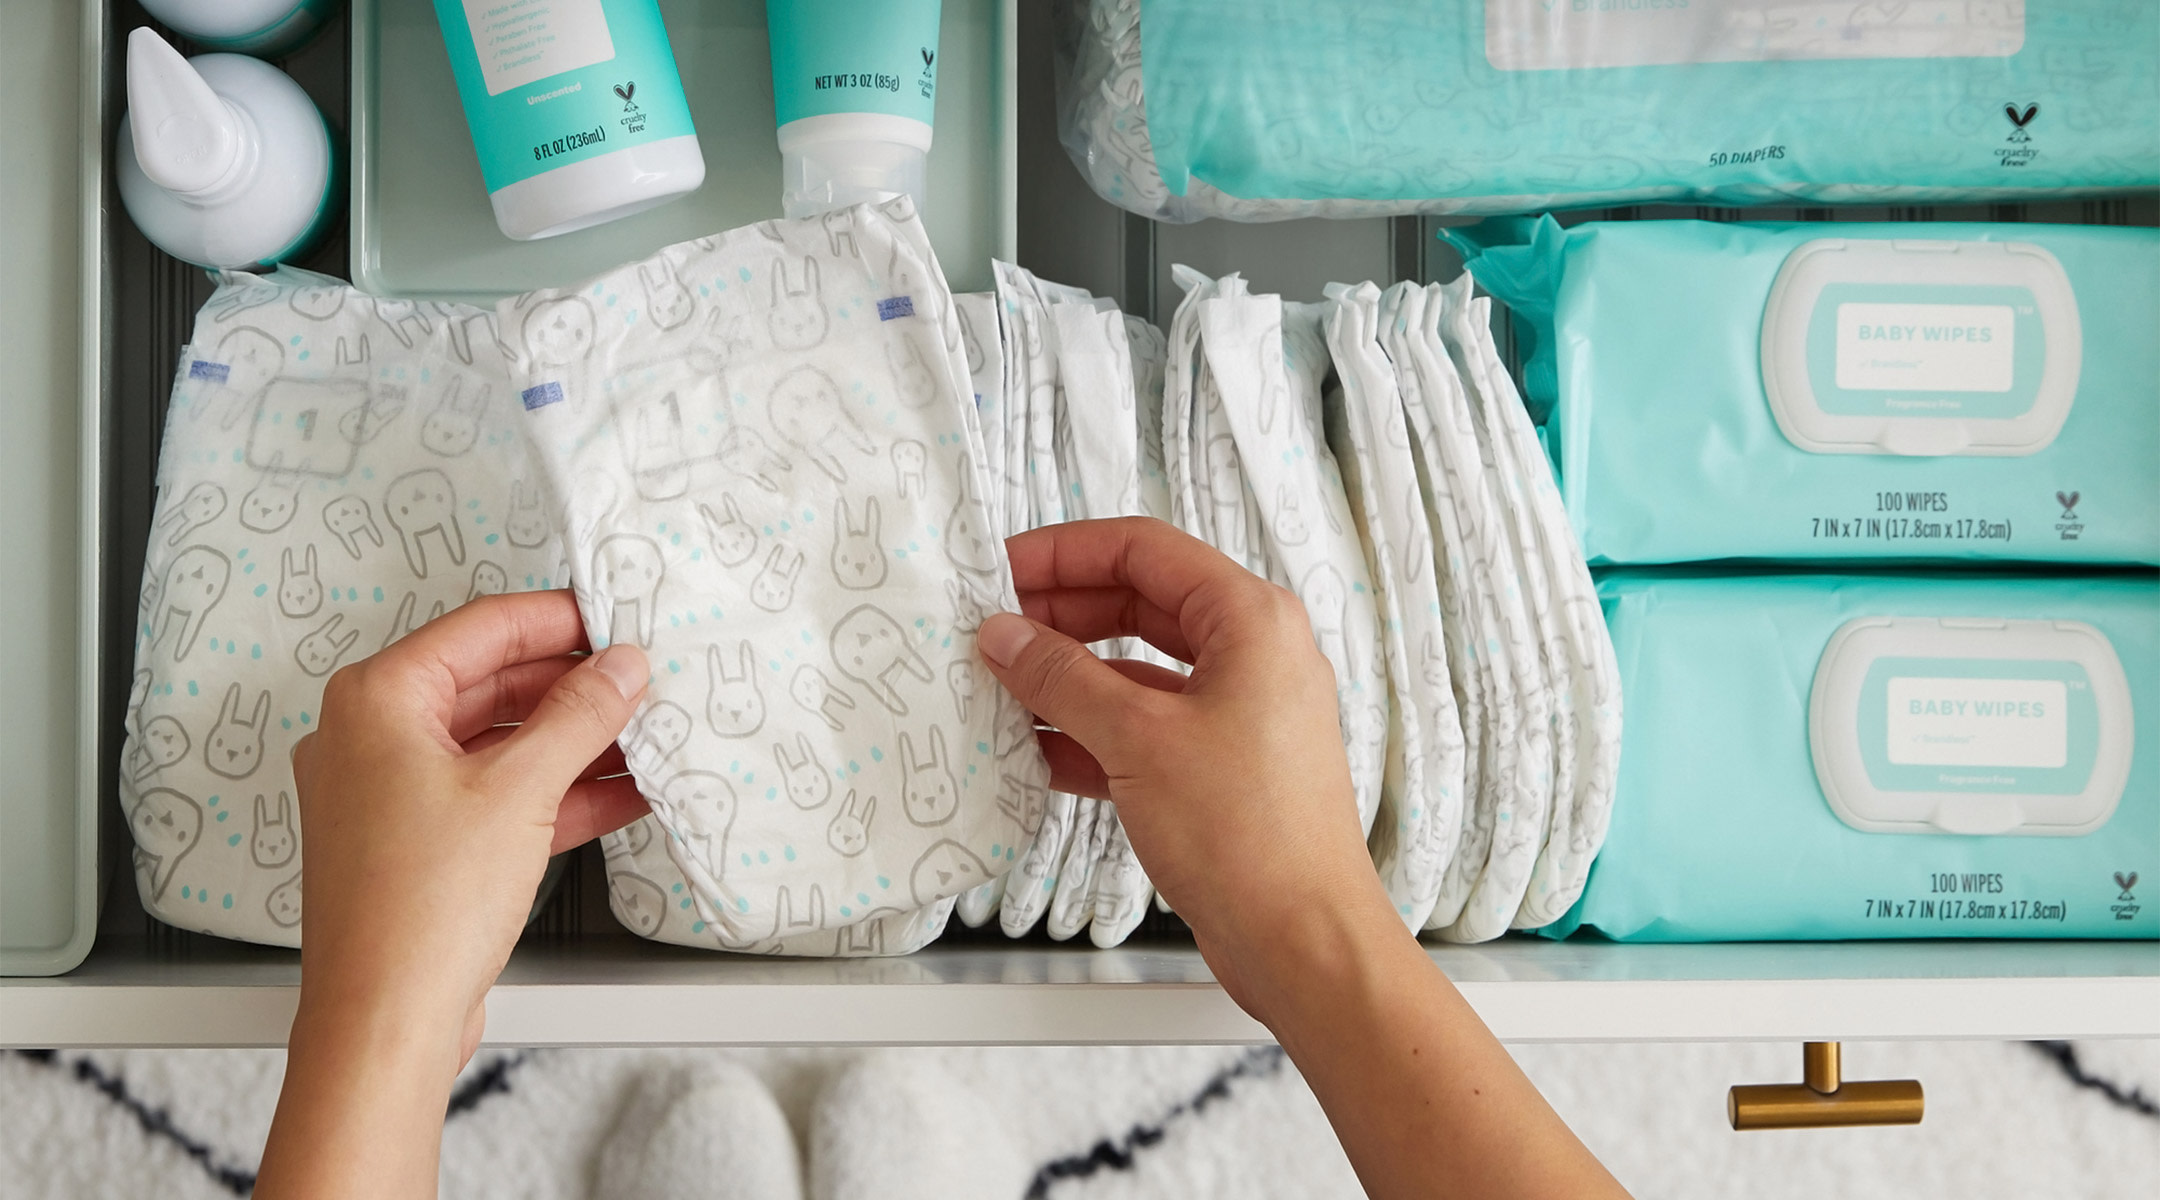 Huggies announces new line of diapers to help the tiniest